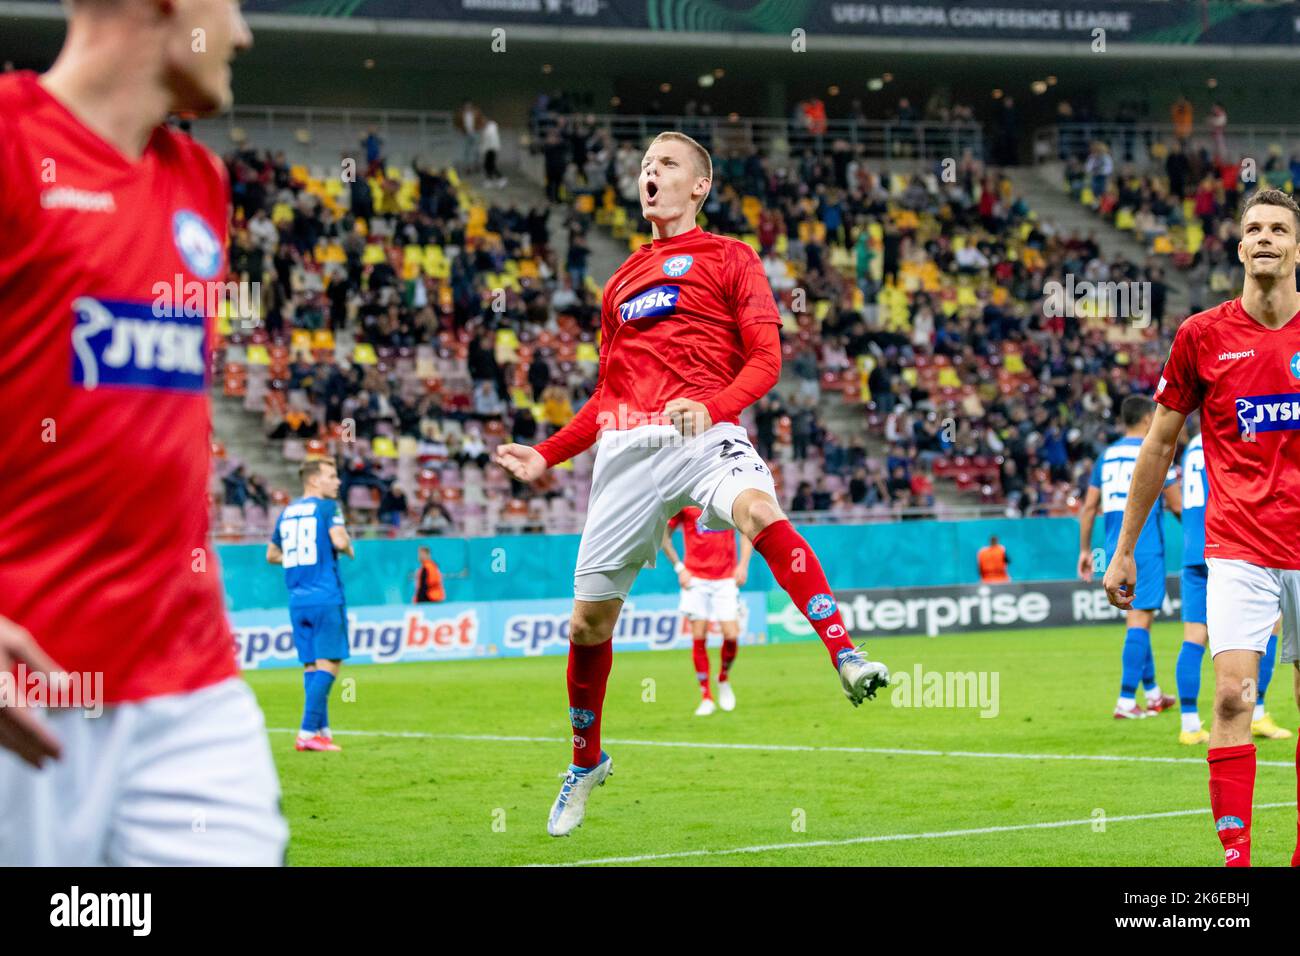 Bucharest, Romania. 14th Oct, 2022. October 14, 2022: Sebastian Jorgensen #27 of Silkeborg IF celebrating the 5th goal during of the UEFA Europa Conference League group B match between FCSB Bucharest and Silkeborg IF at National Arena Stadium in Bucharest, Romania ROU. Catalin Soare/Cronos Credit: Cronos/Alamy Live News Stock Photo